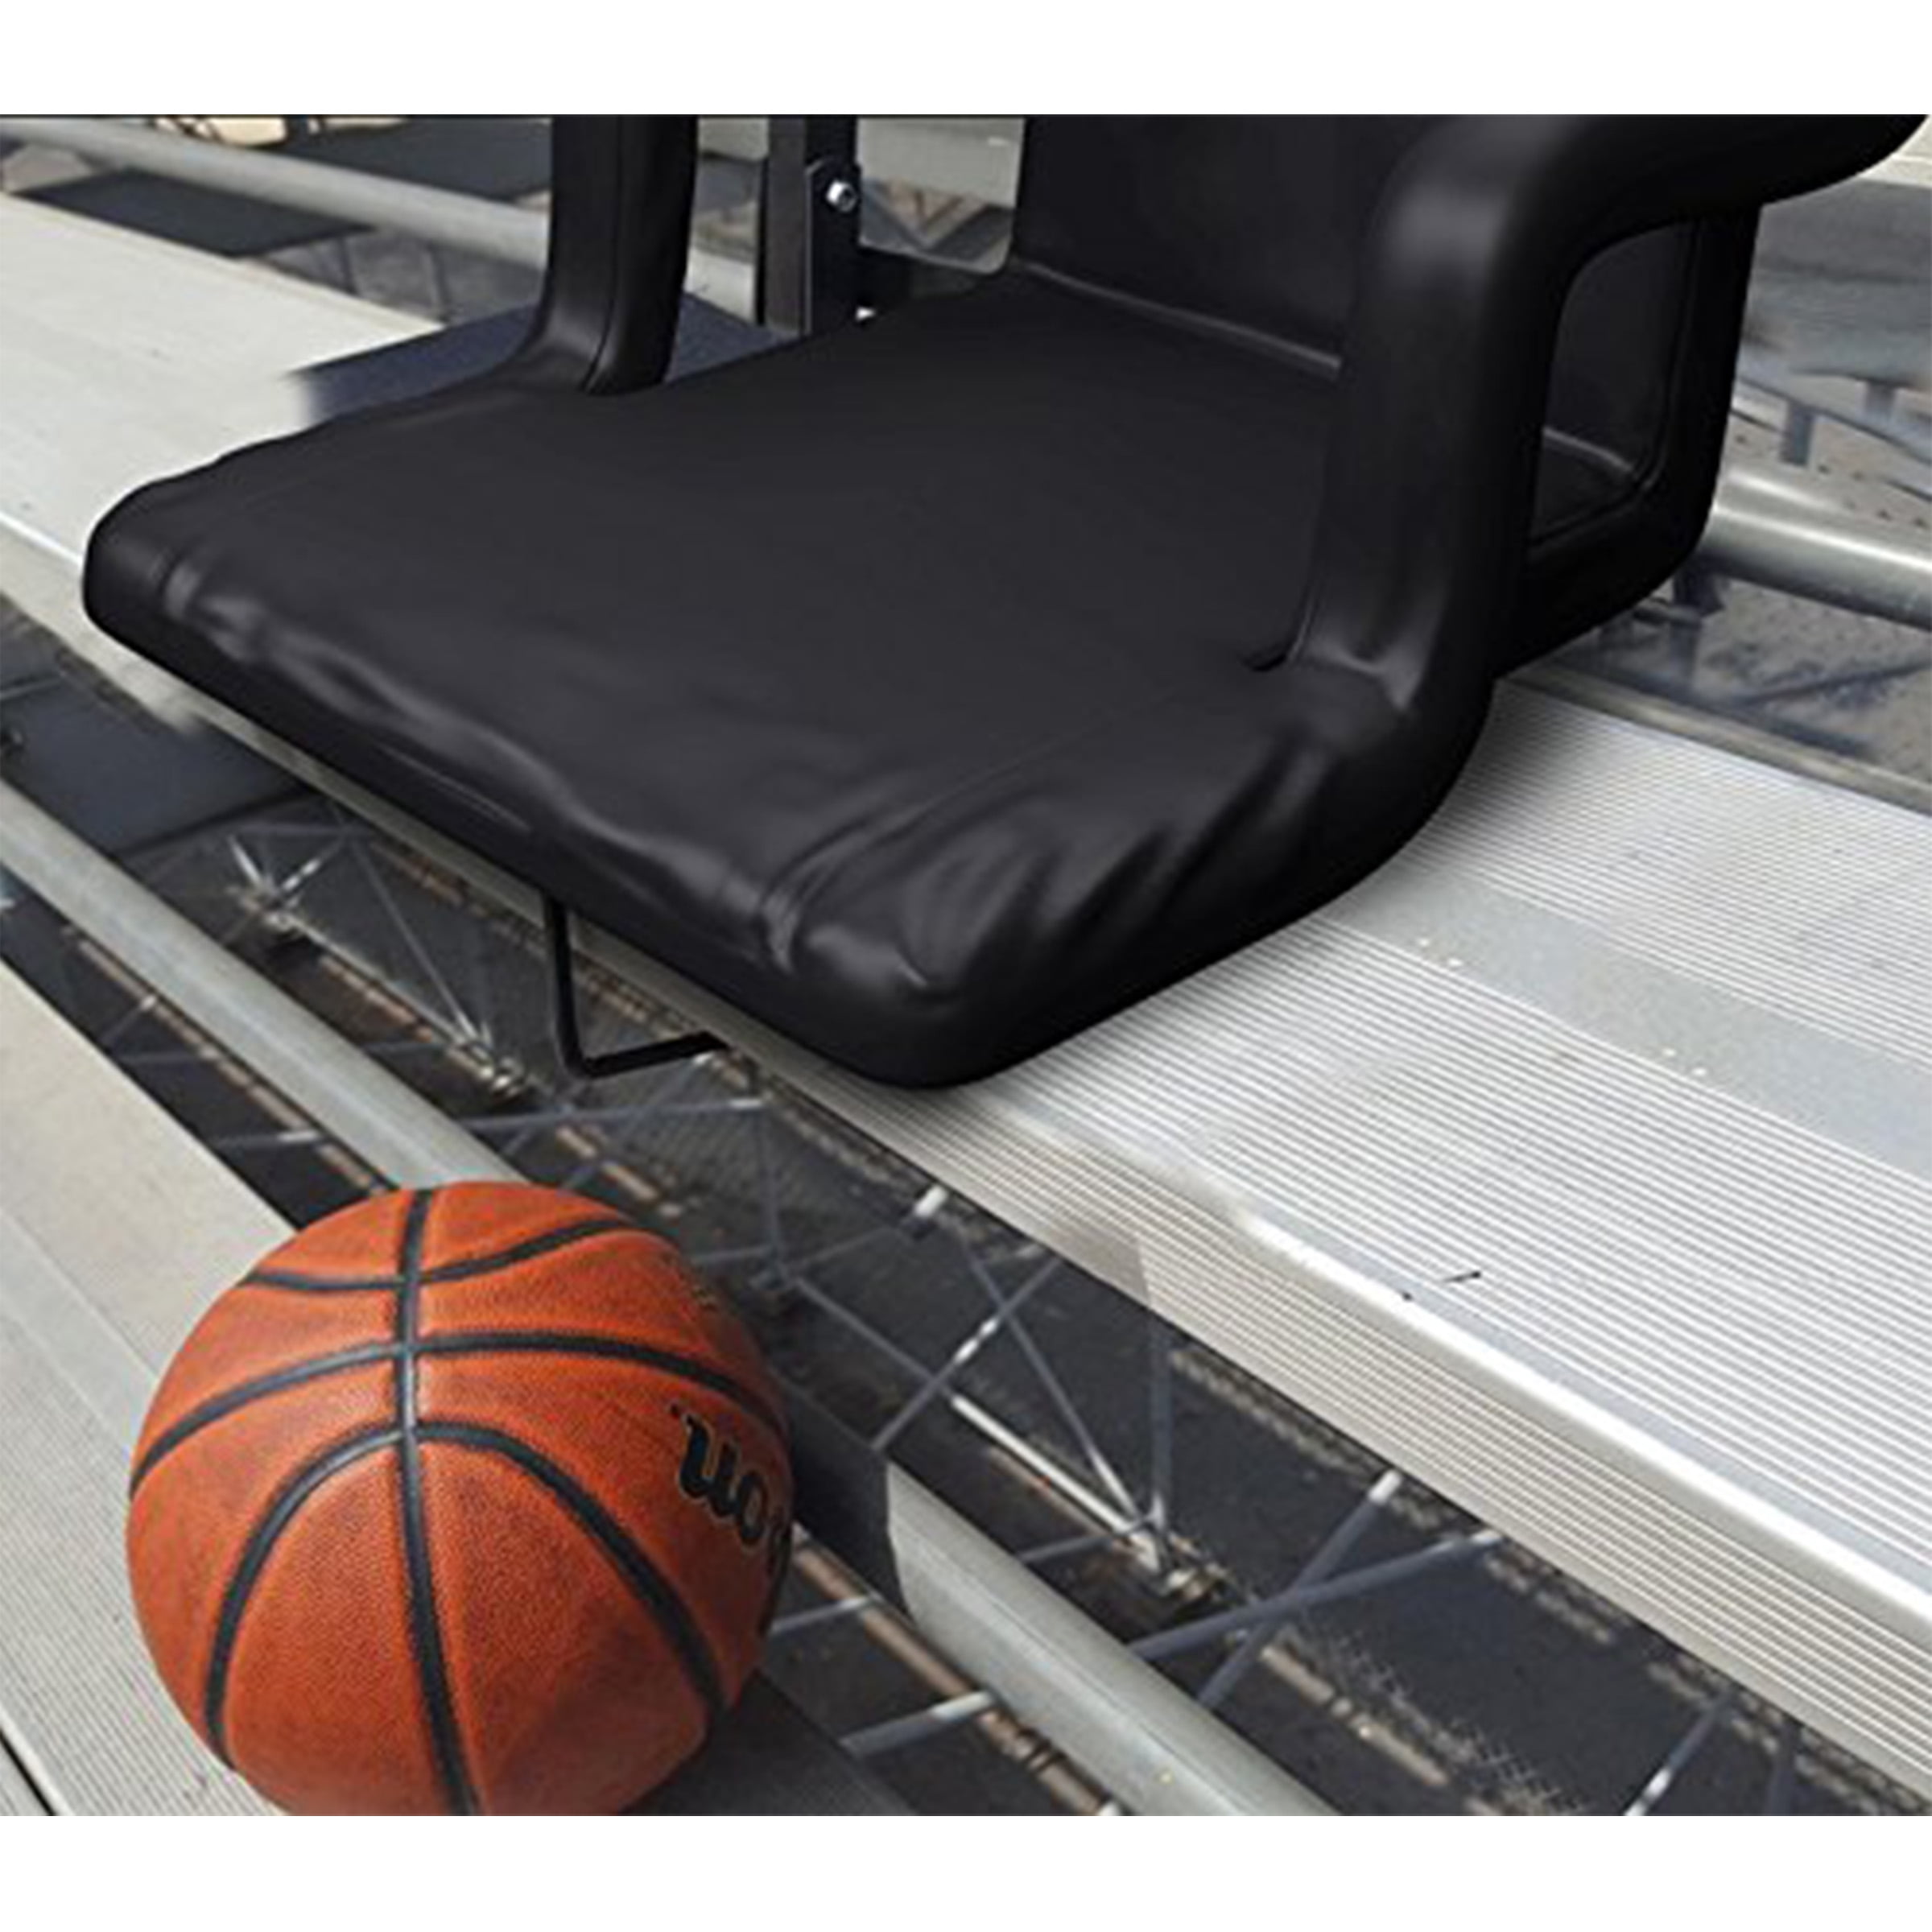 Home-Complete Stadium Chair - Padded Seat with Back Support, Armrests,  Recline, Portable Straps & Reviews